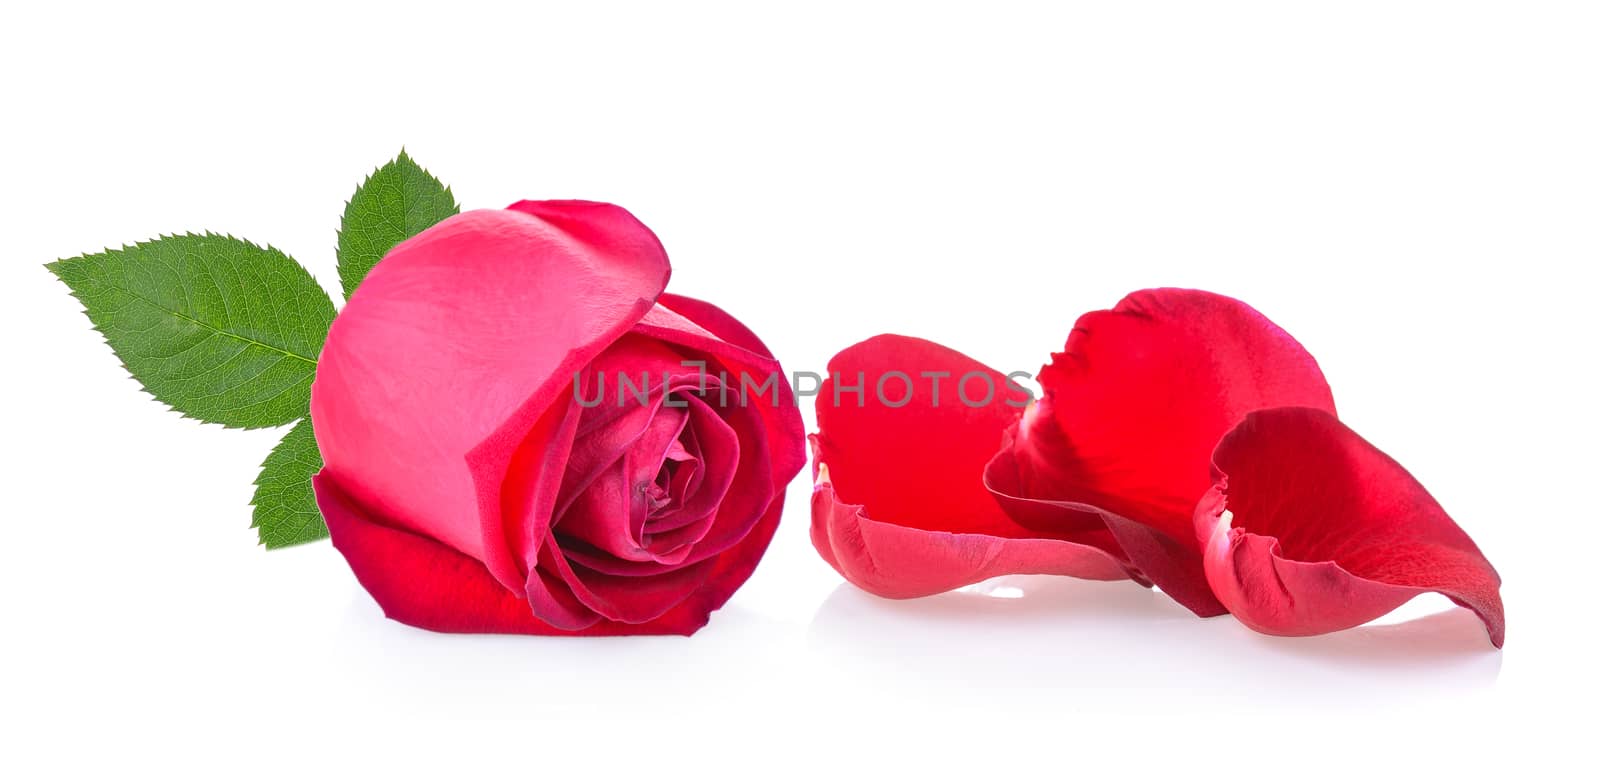 red rose with leaf on white background